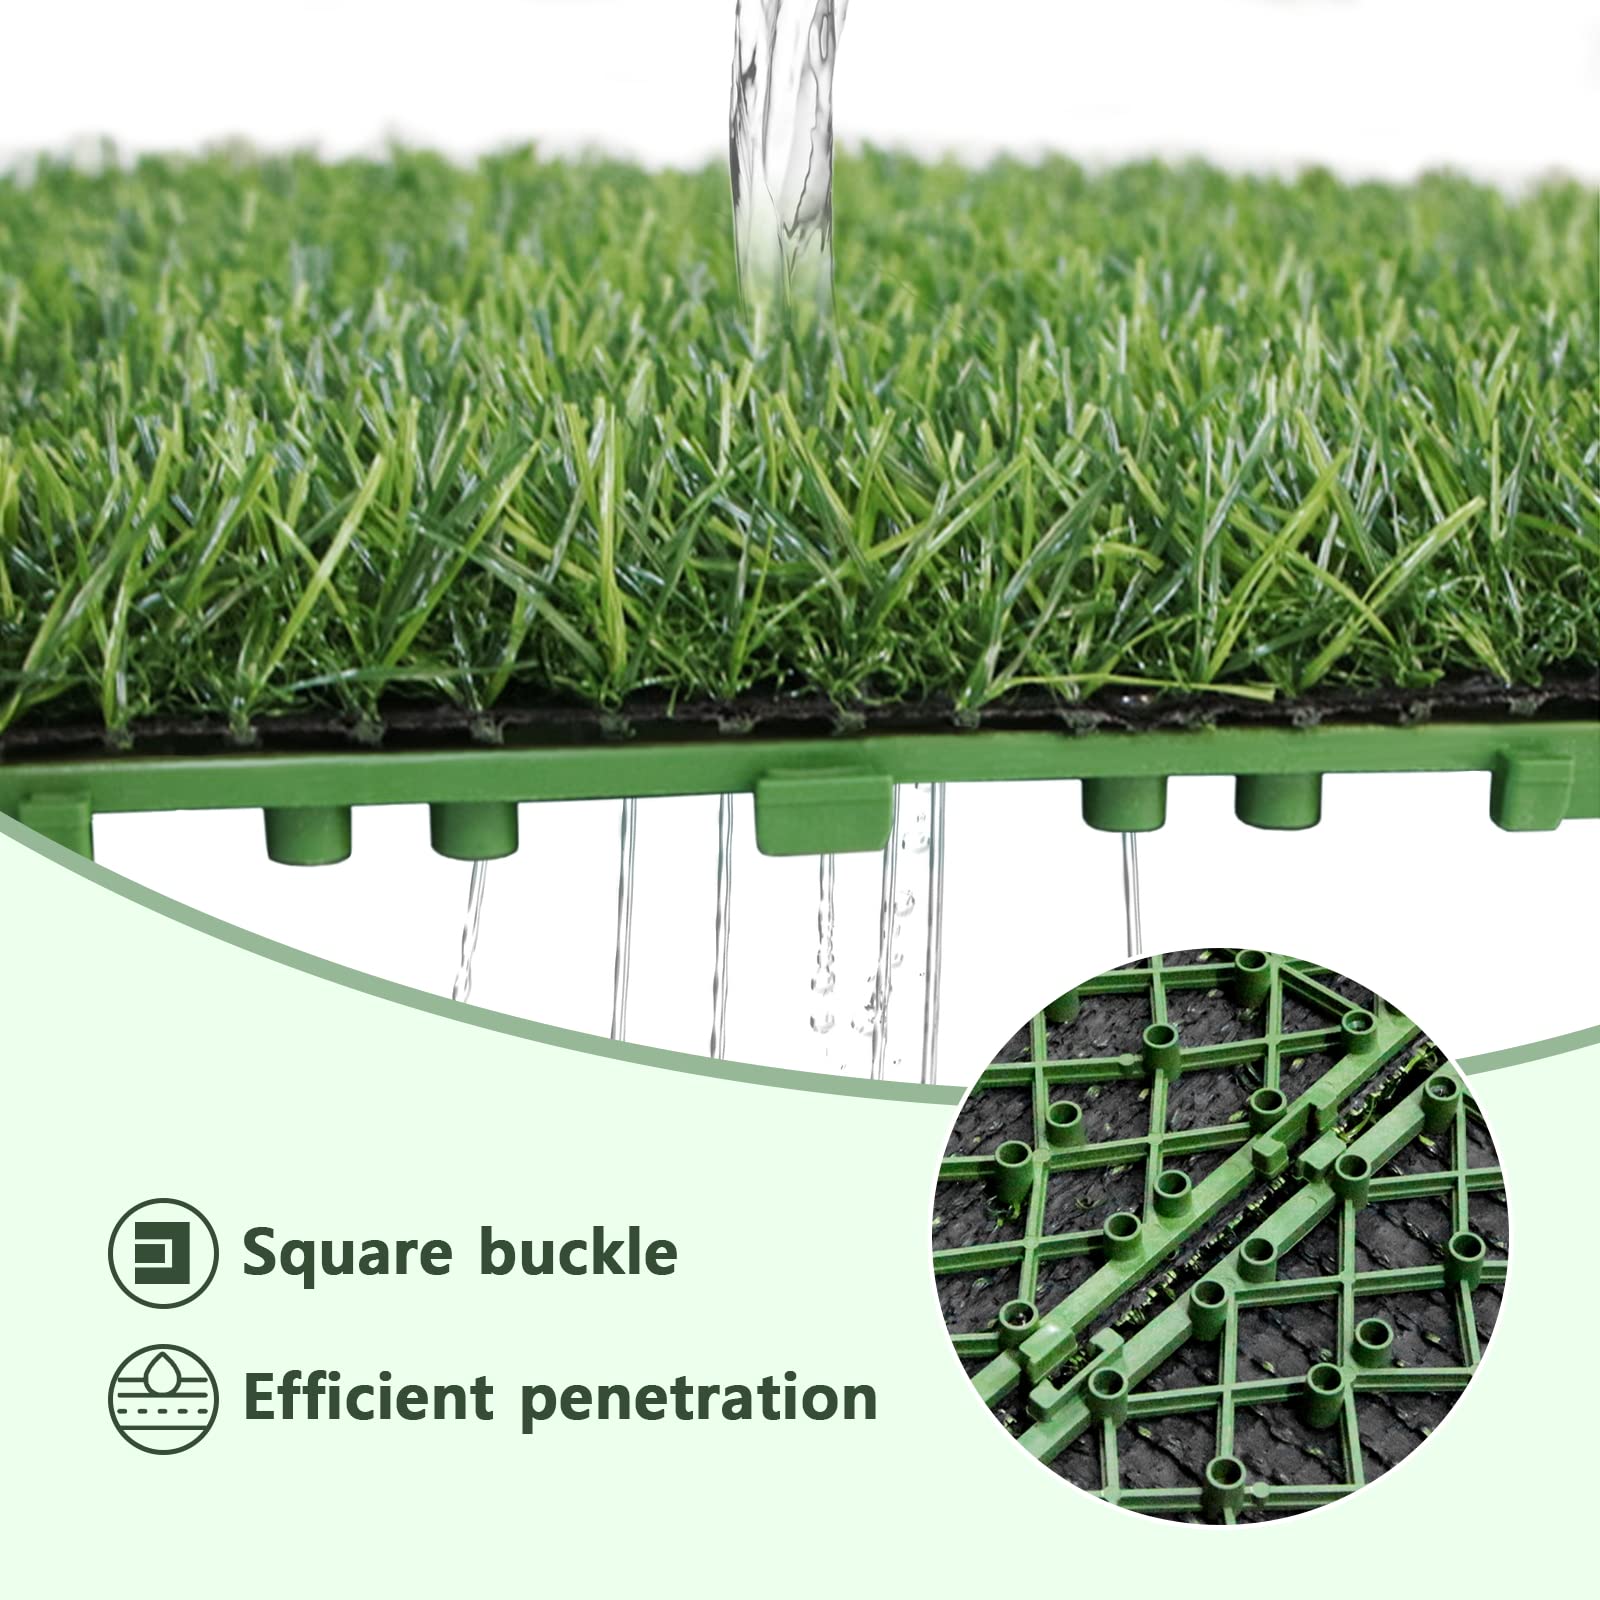 Loytryal 39.4 x 31.5 Inches Fake Grass Pee for Dogs Artificial Grass Rug Turf for Puppy Potty Training Washable Grass Mat Pee Grass for Dog Potty Tray (6 Piece)